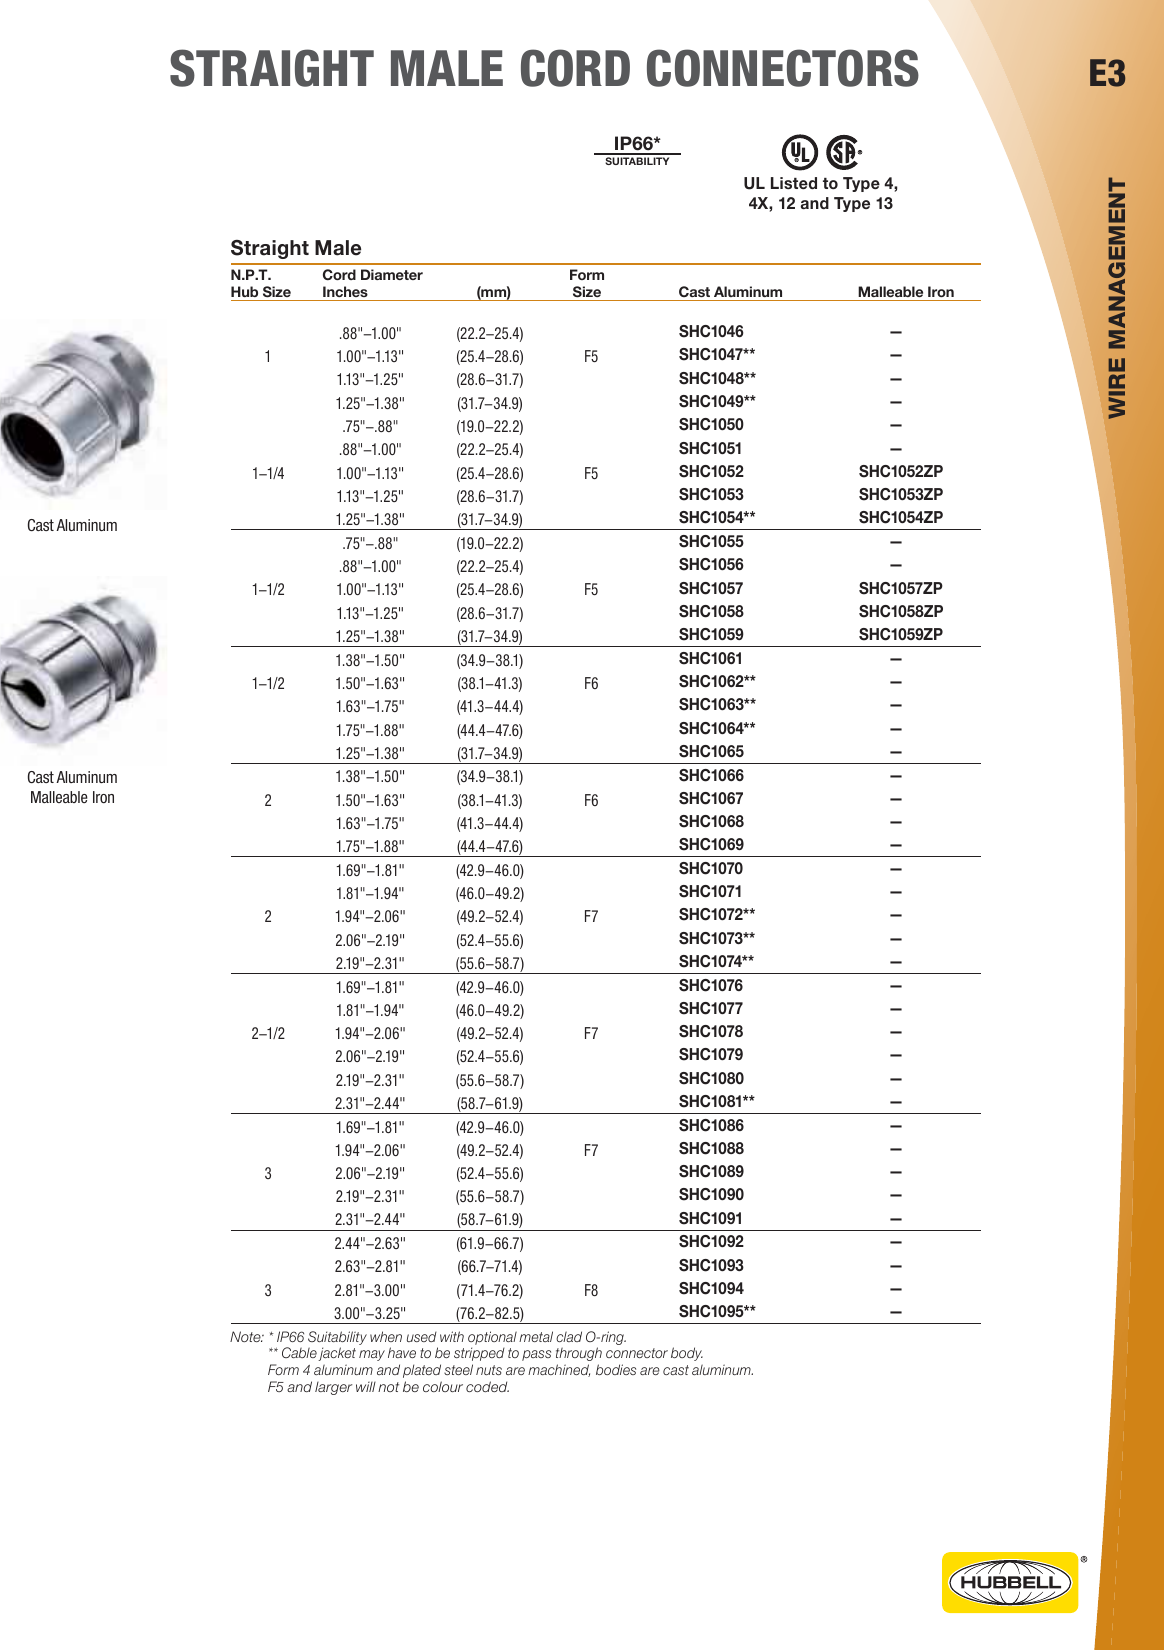 Page 3 of 12 - 1000439559-Catalog